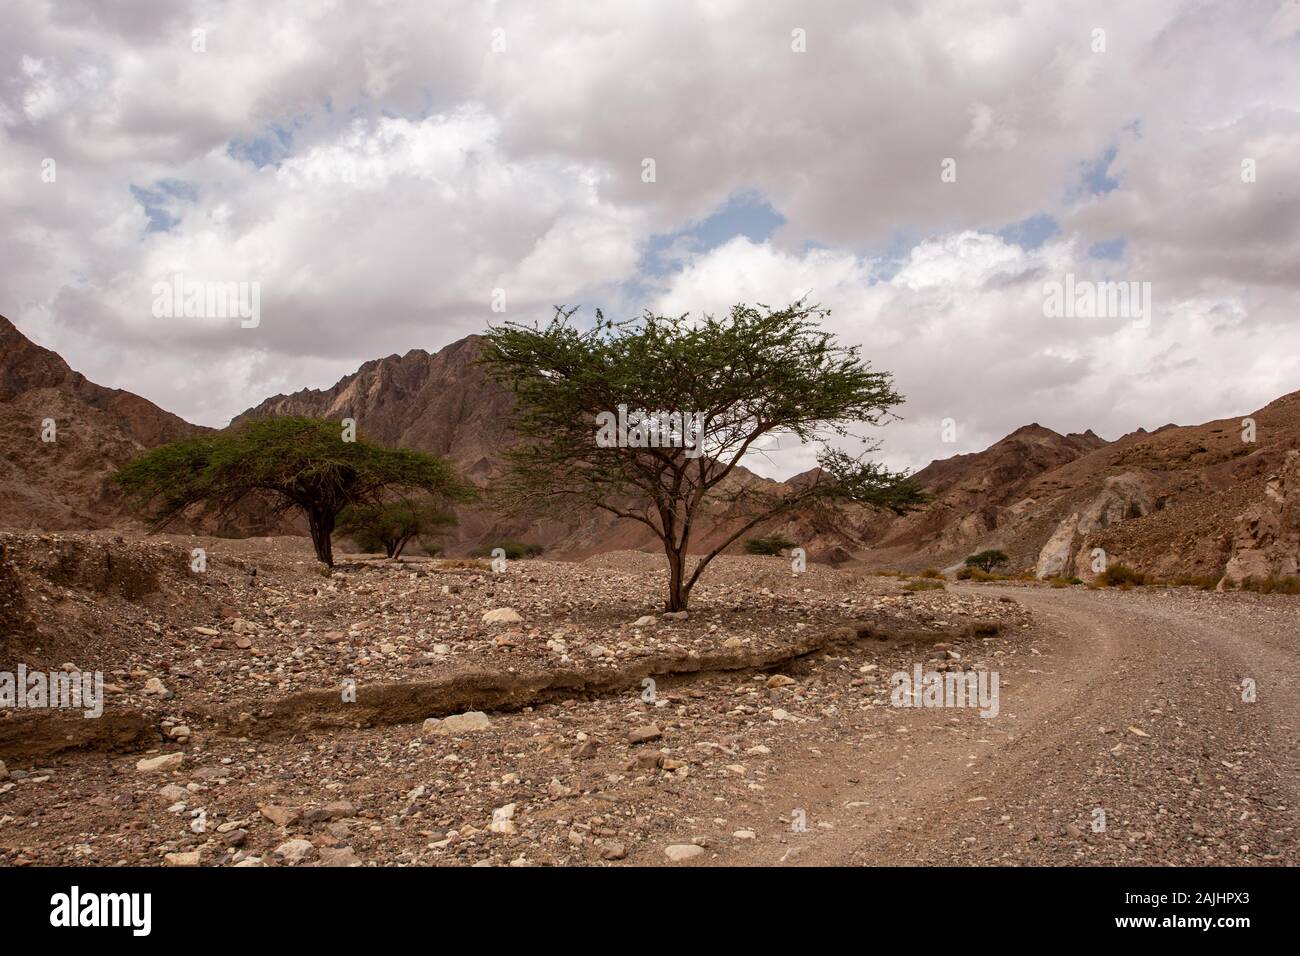 Acacia tree in the deserts of Israel Stock Photo